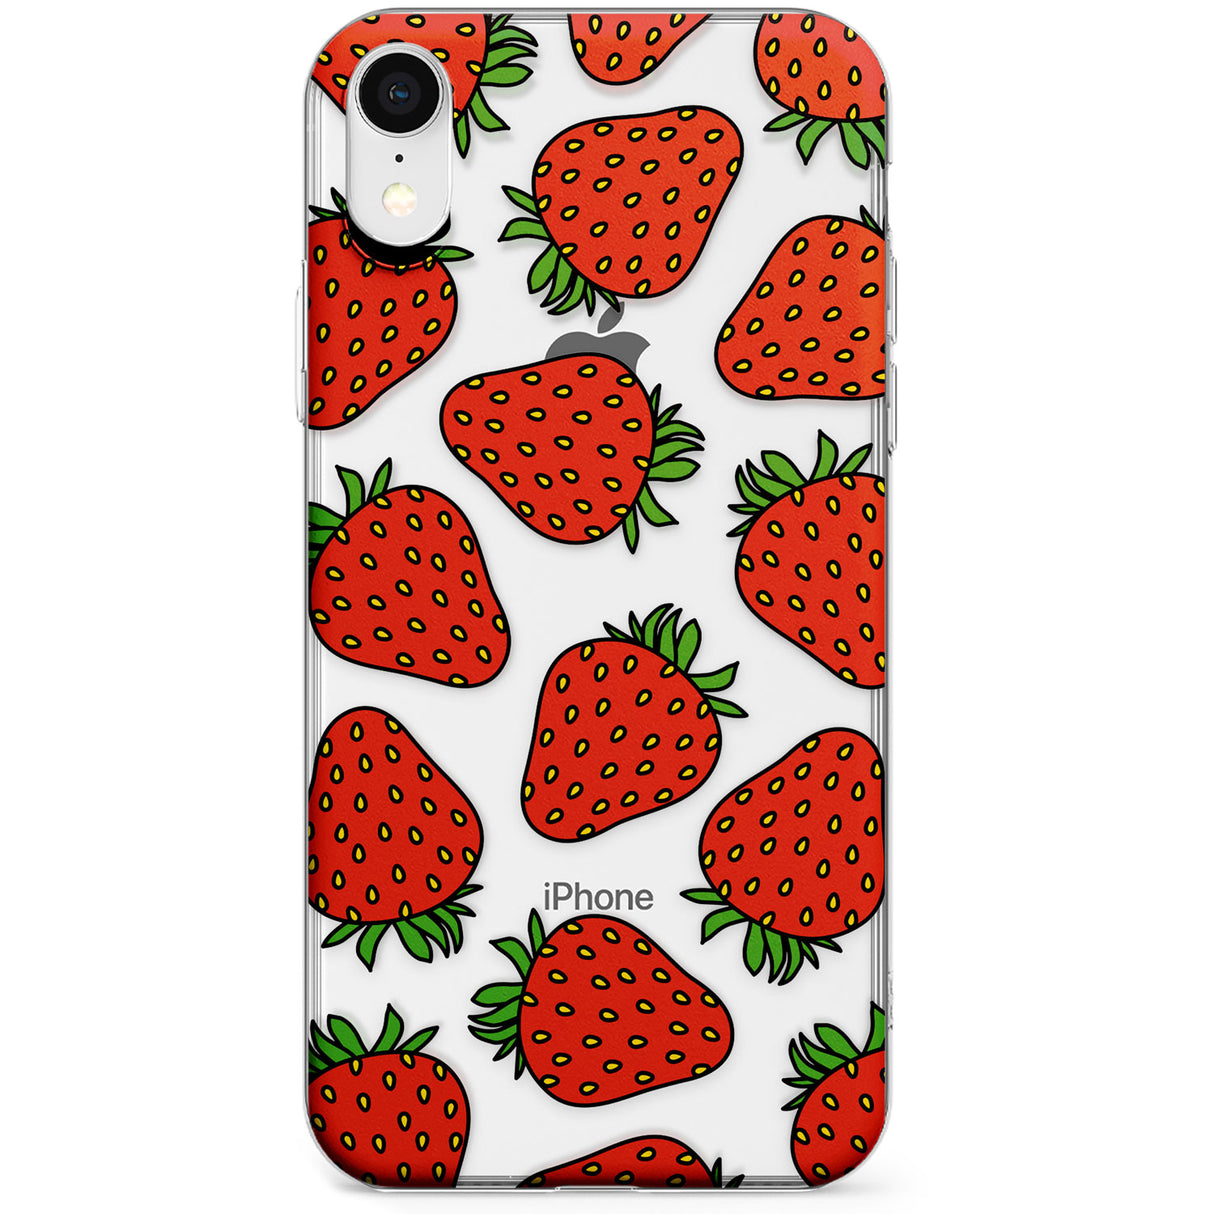 Strawberry Pattern Phone Case for iPhone X, XS Max, XR